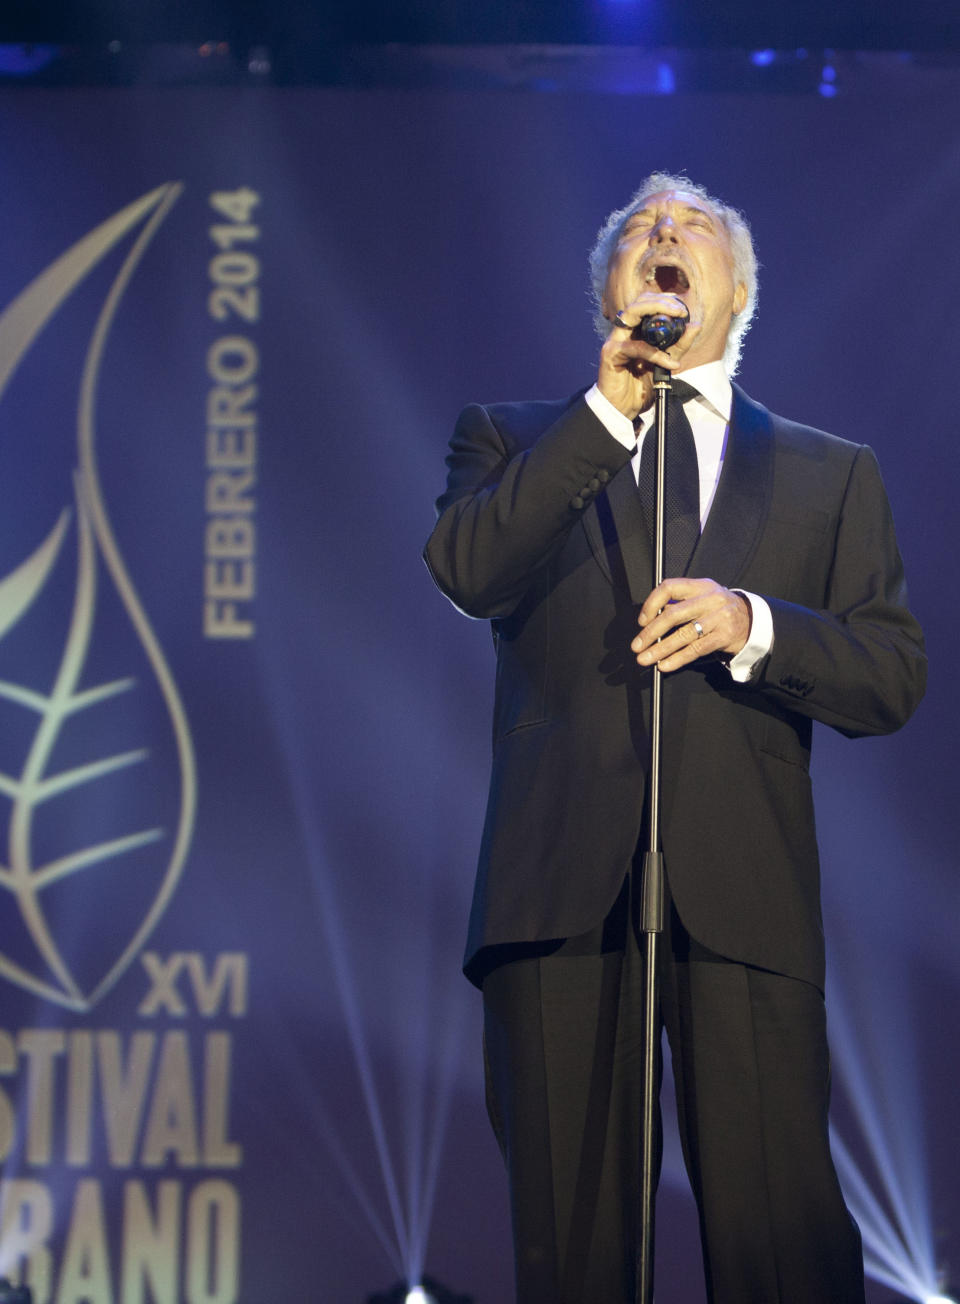 Welsh crooner Tom Jones performs during a gala dinner marking the end of the 16th annual Cigar Festival in Havana, Cuba, Friday, Feb. 28, 2014. The festival is a five-day bash that brings together hundreds of cigar sophisticates from around the world, and culminates with a gala and auction of humidors worth hundreds of thousands of dollars. Tom Jones was among the celebrity invitees at Saturday's auction and sang three songs for attending guests, including his signature "It's Not Unusual." (AP Photo/Franklin Reyes)